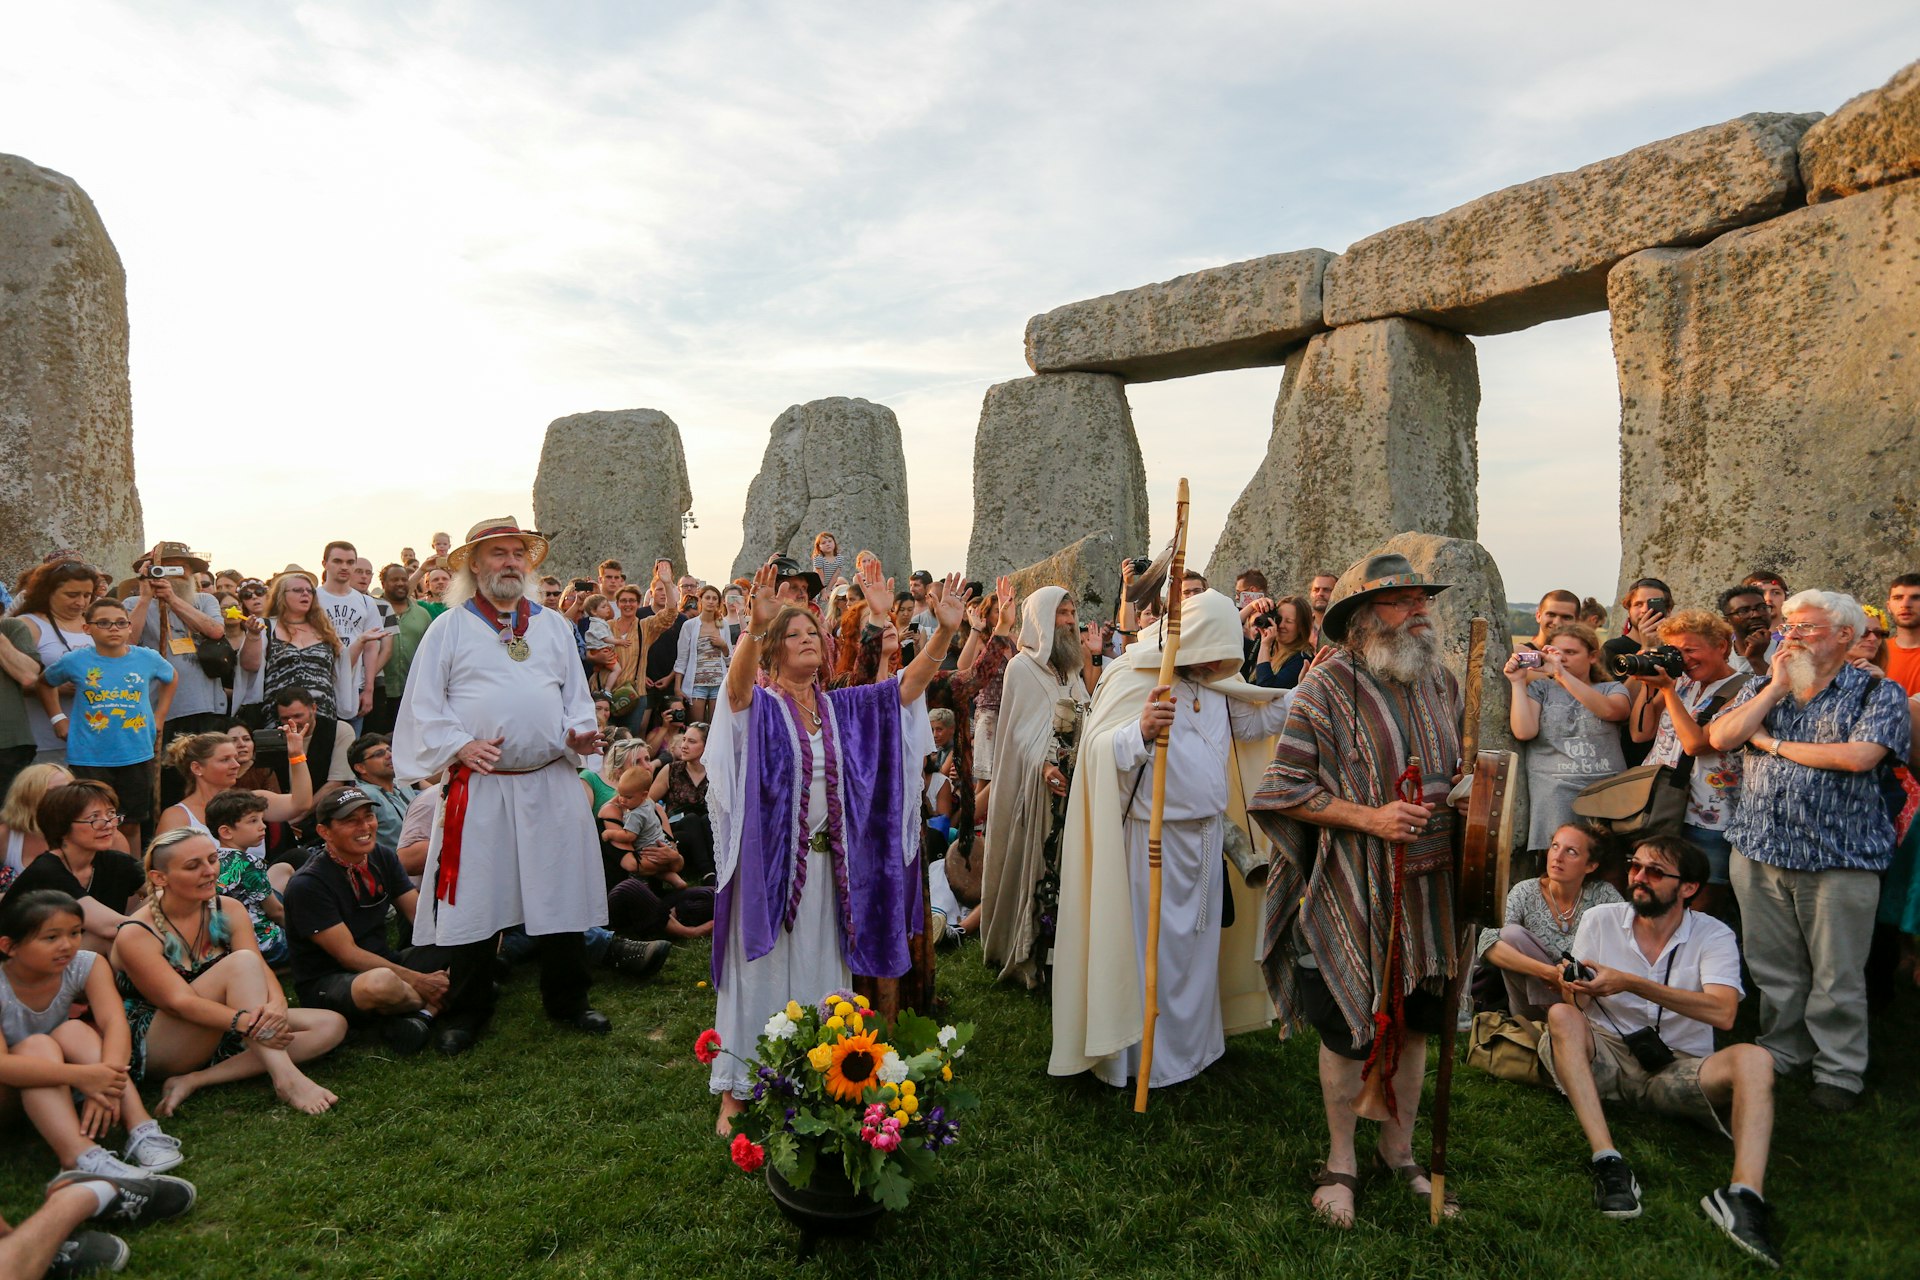 Revellers gather for the Summer Solstice at Stonehenge, Wiltshire, England, United Kingdom